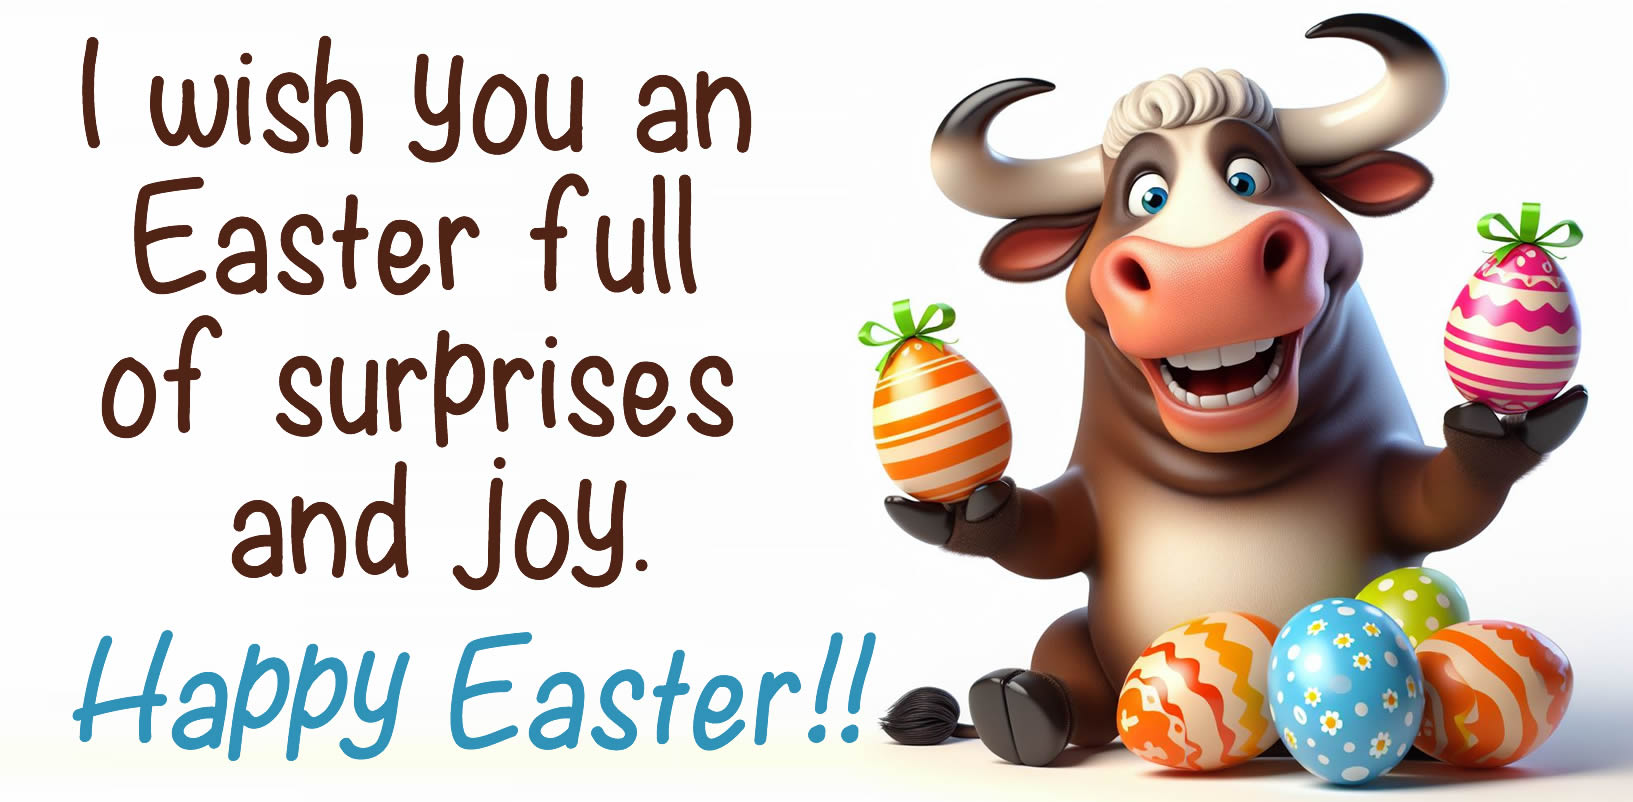 Easter card with greeting message: I wish you an Easter full of surprises and joy.